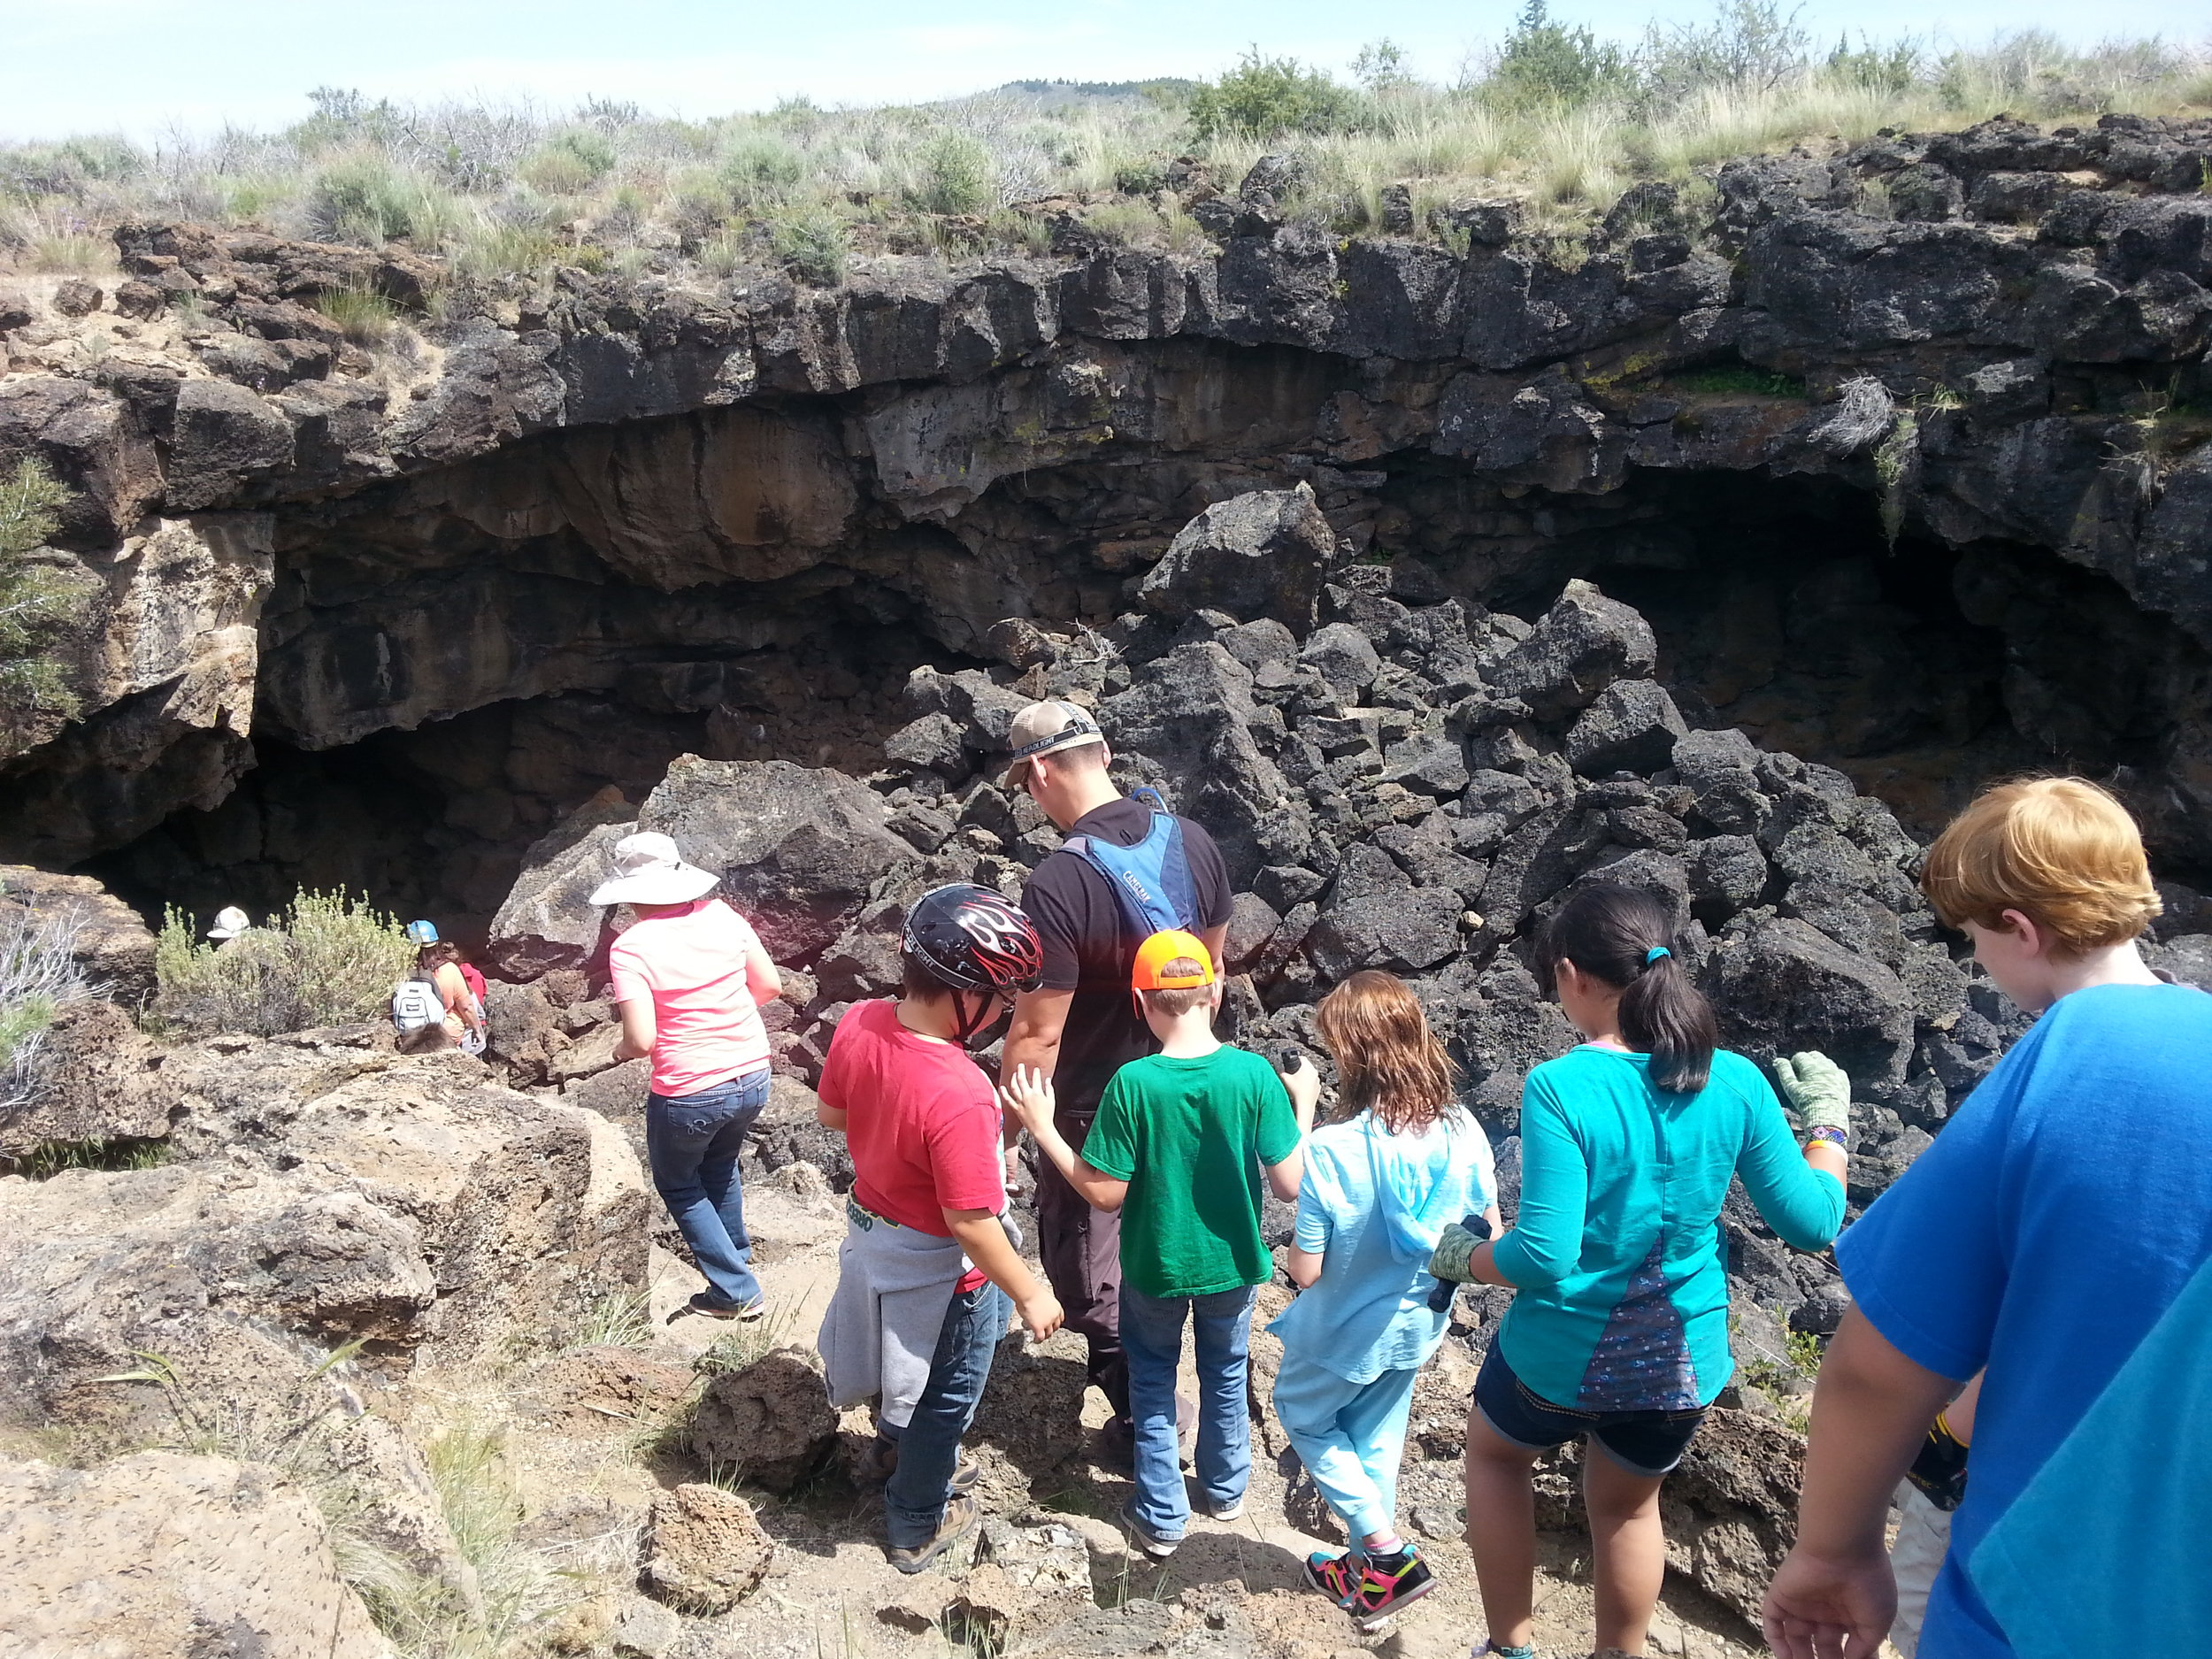 LAVA BEDS NATIONAL MONUMENT - What to do in Southern Oregon- Things to do - Hiking - Caves - Kids - Junior Rangers